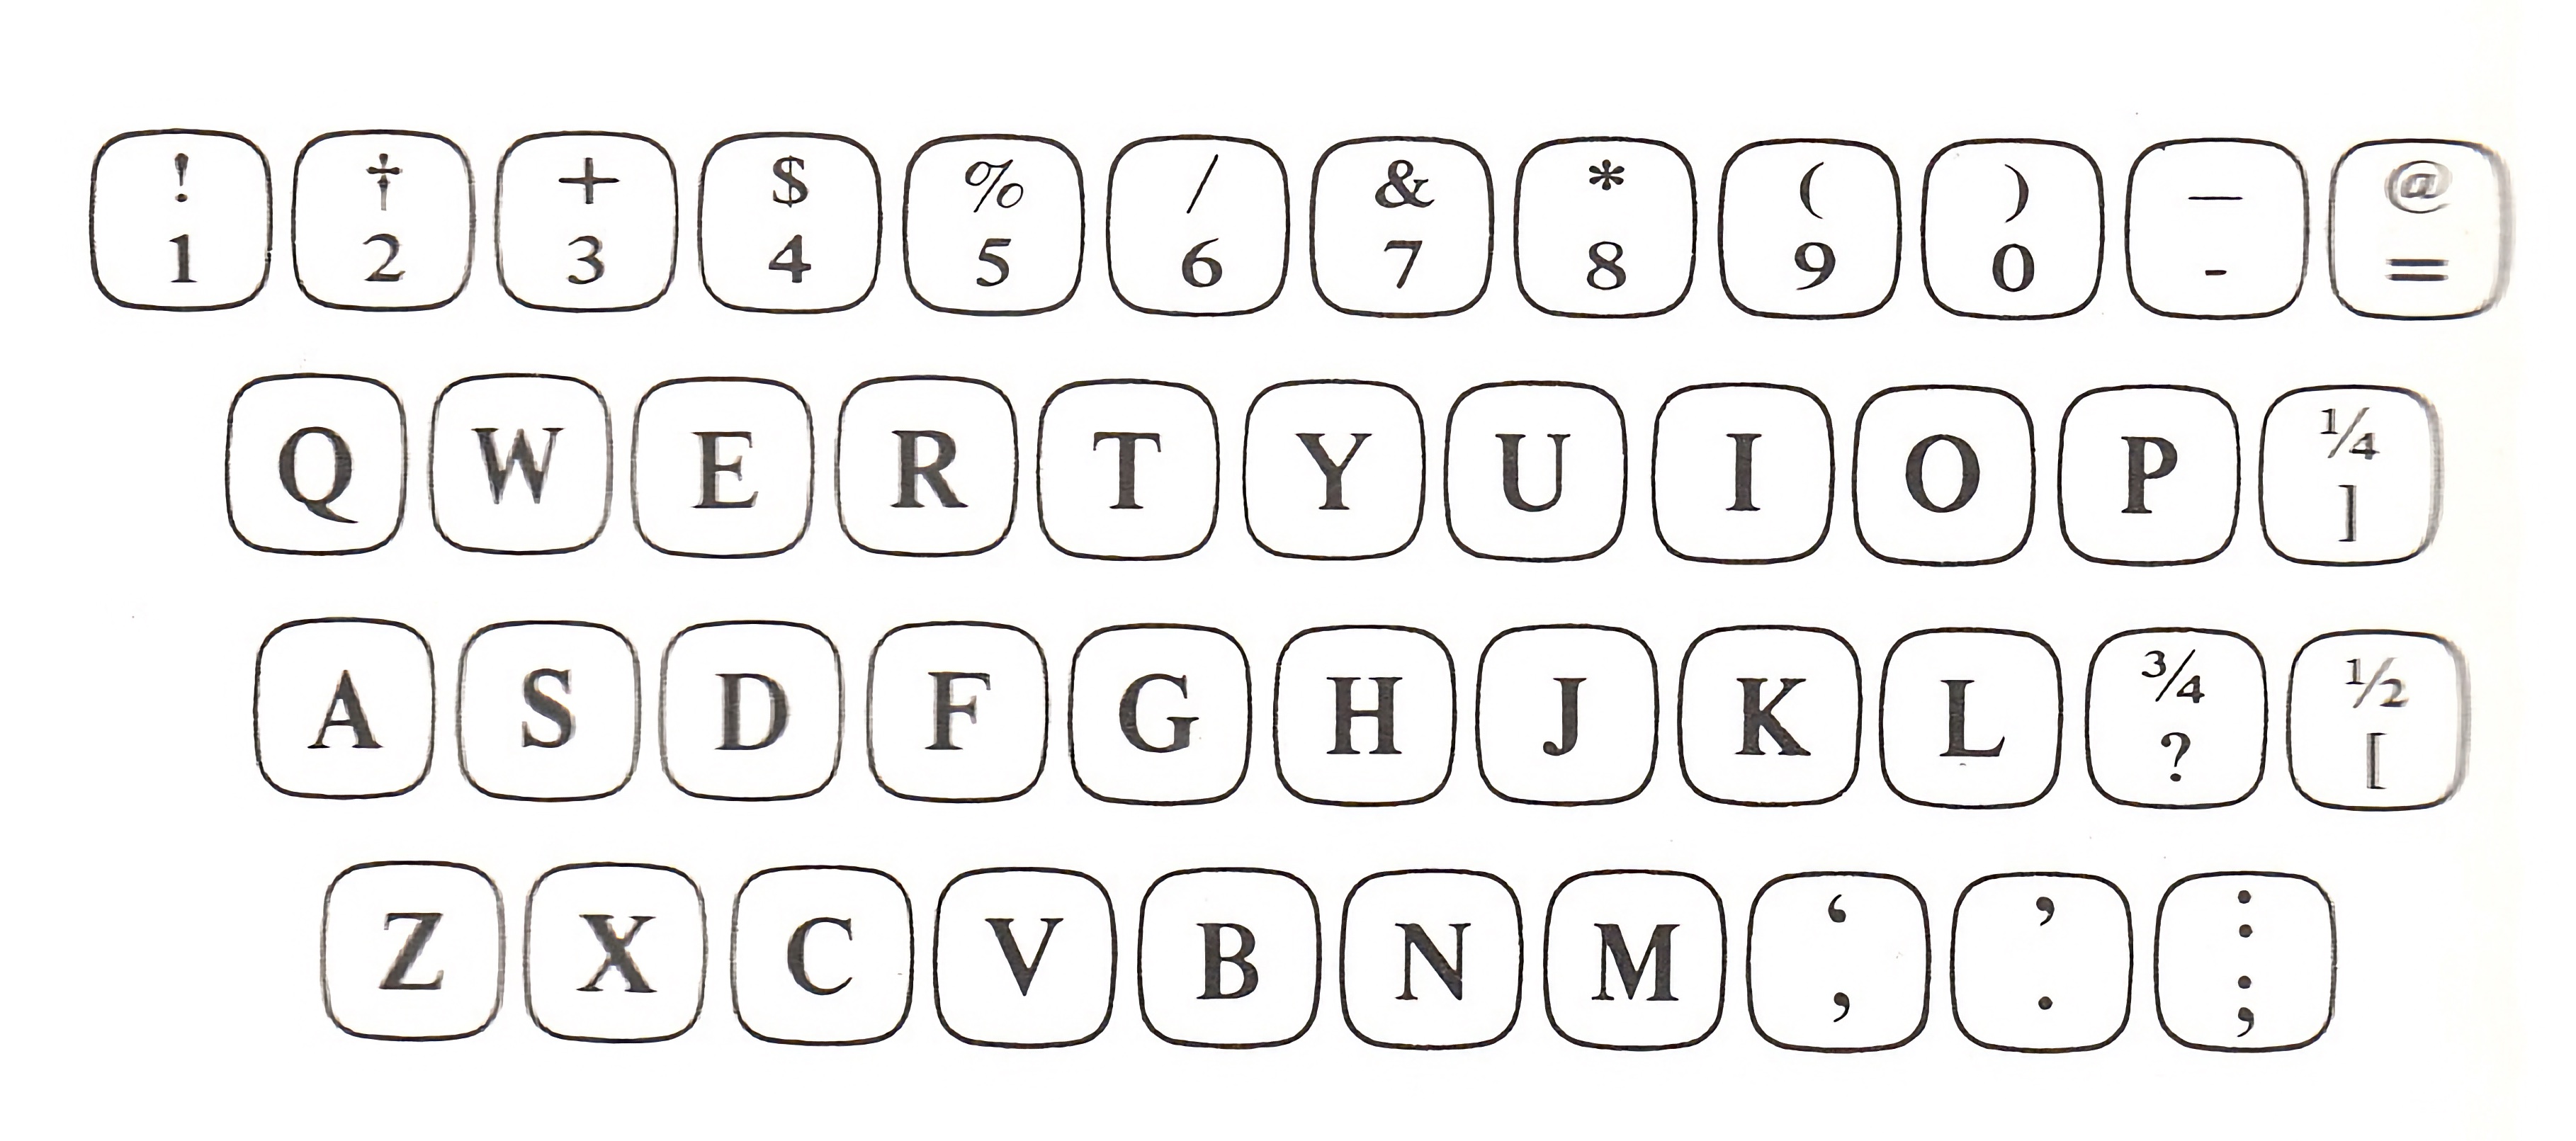 The Composer keyboard layout